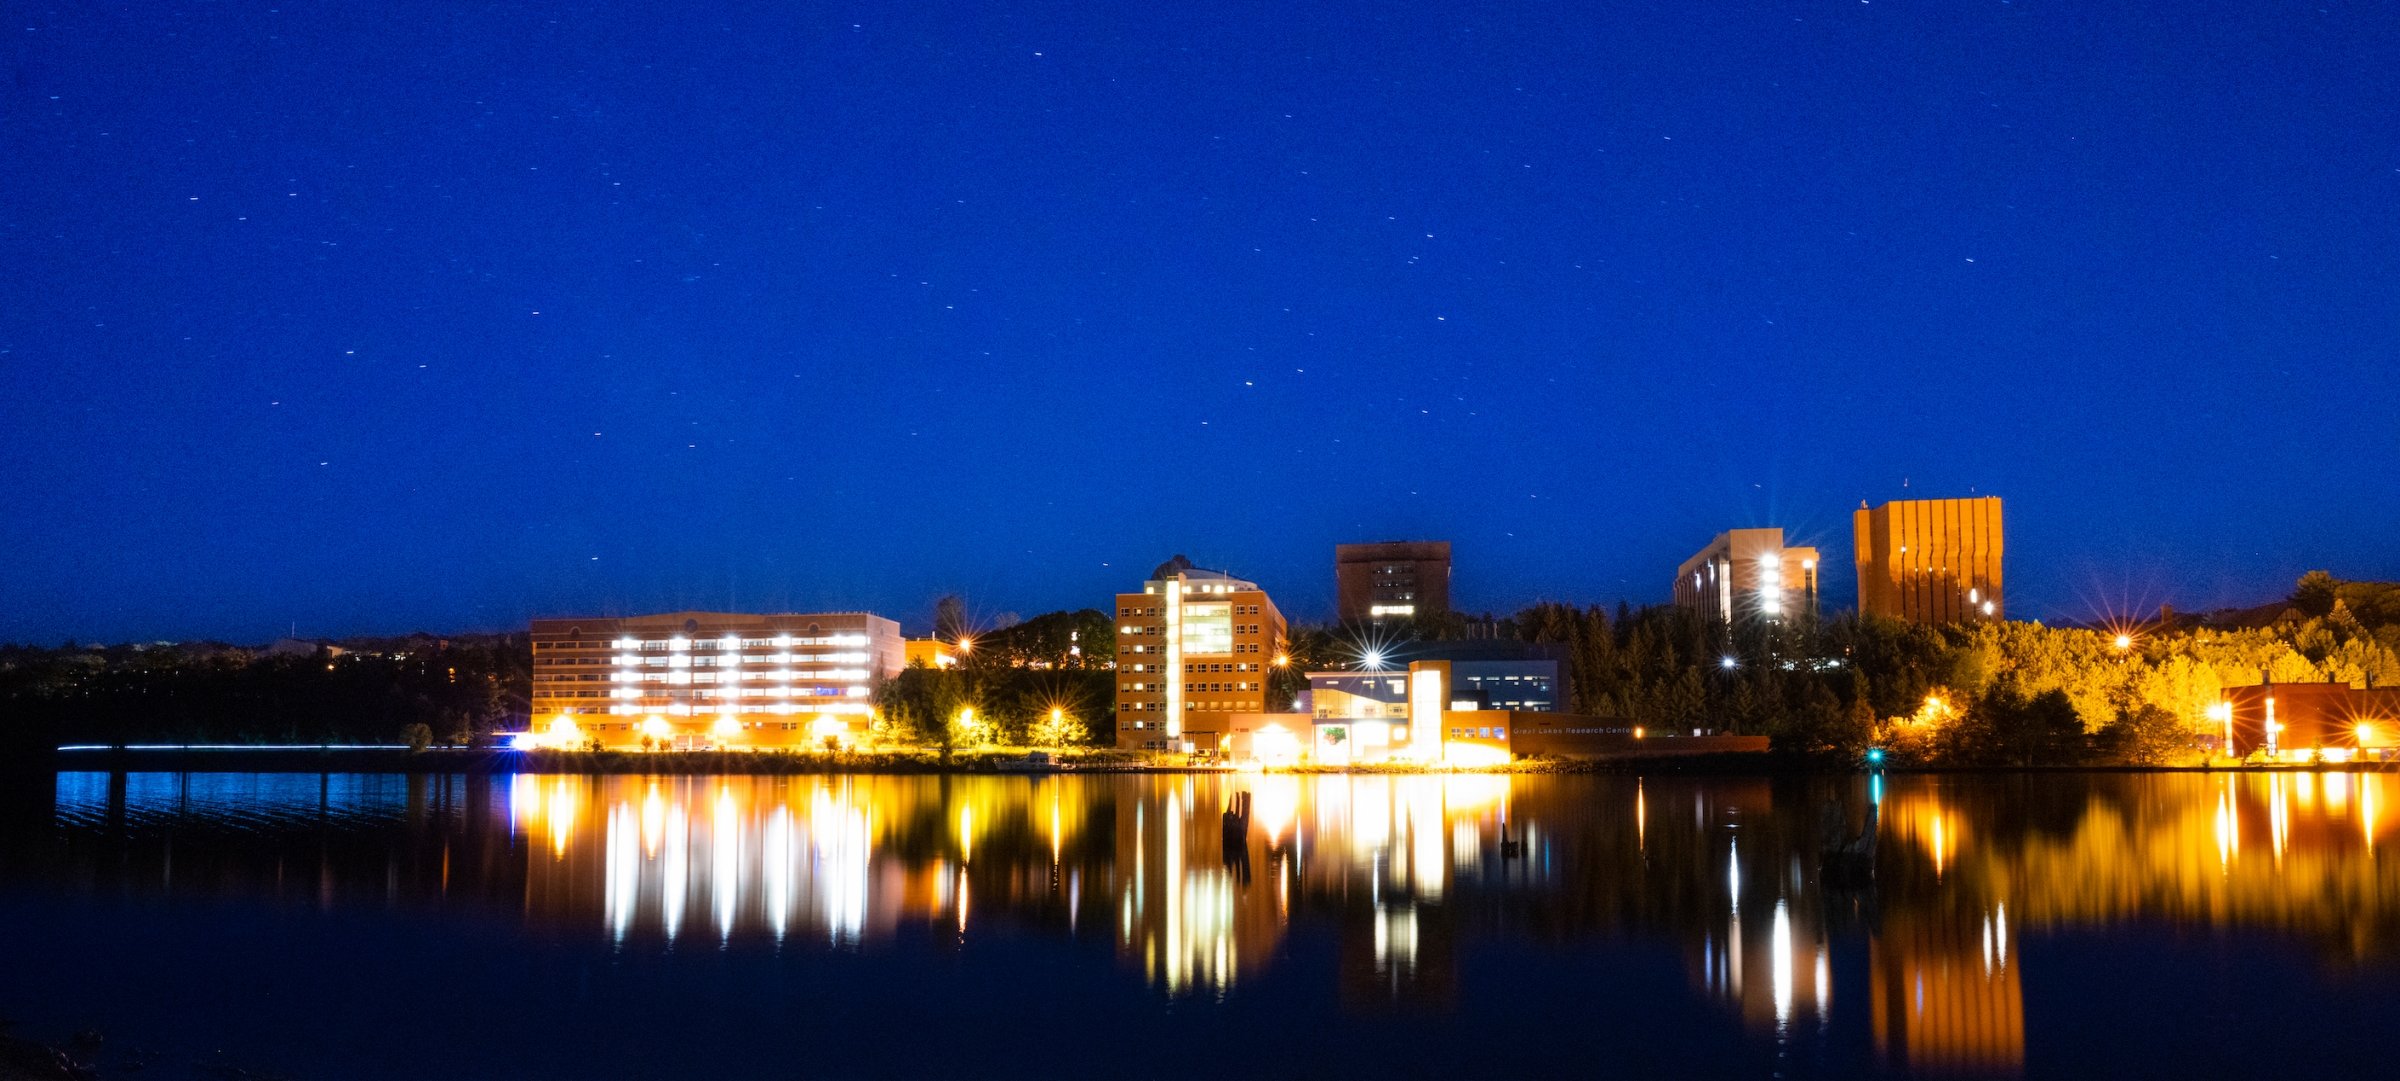 Michigan Tech campus at night from the Portage Canal.